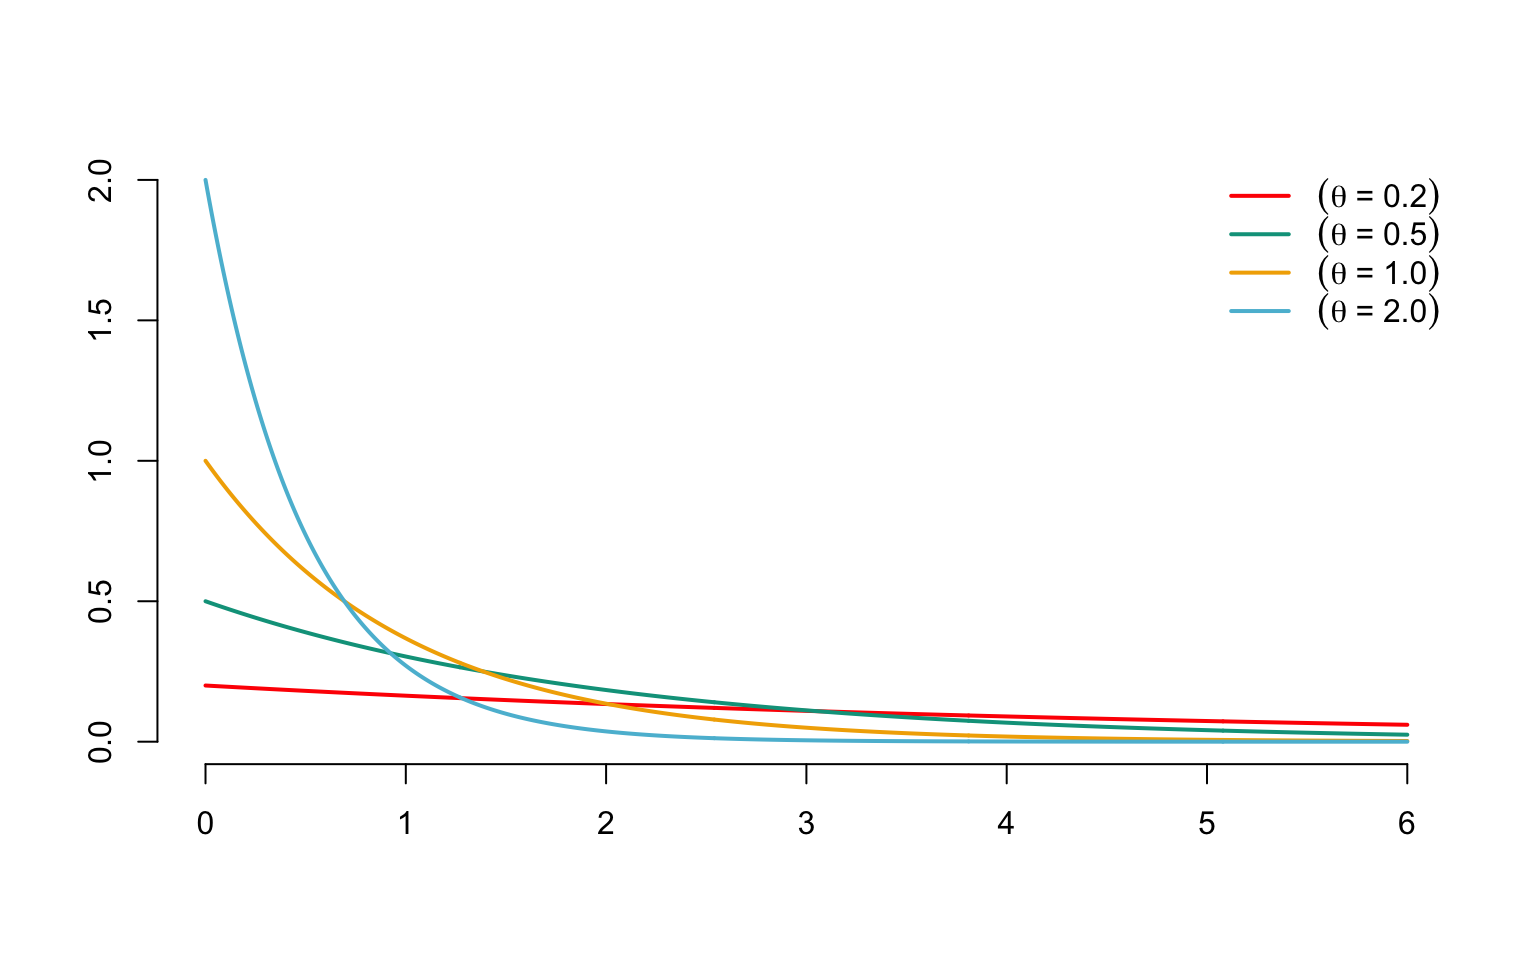 Densities of exponential distributions with different parameters $\theta$